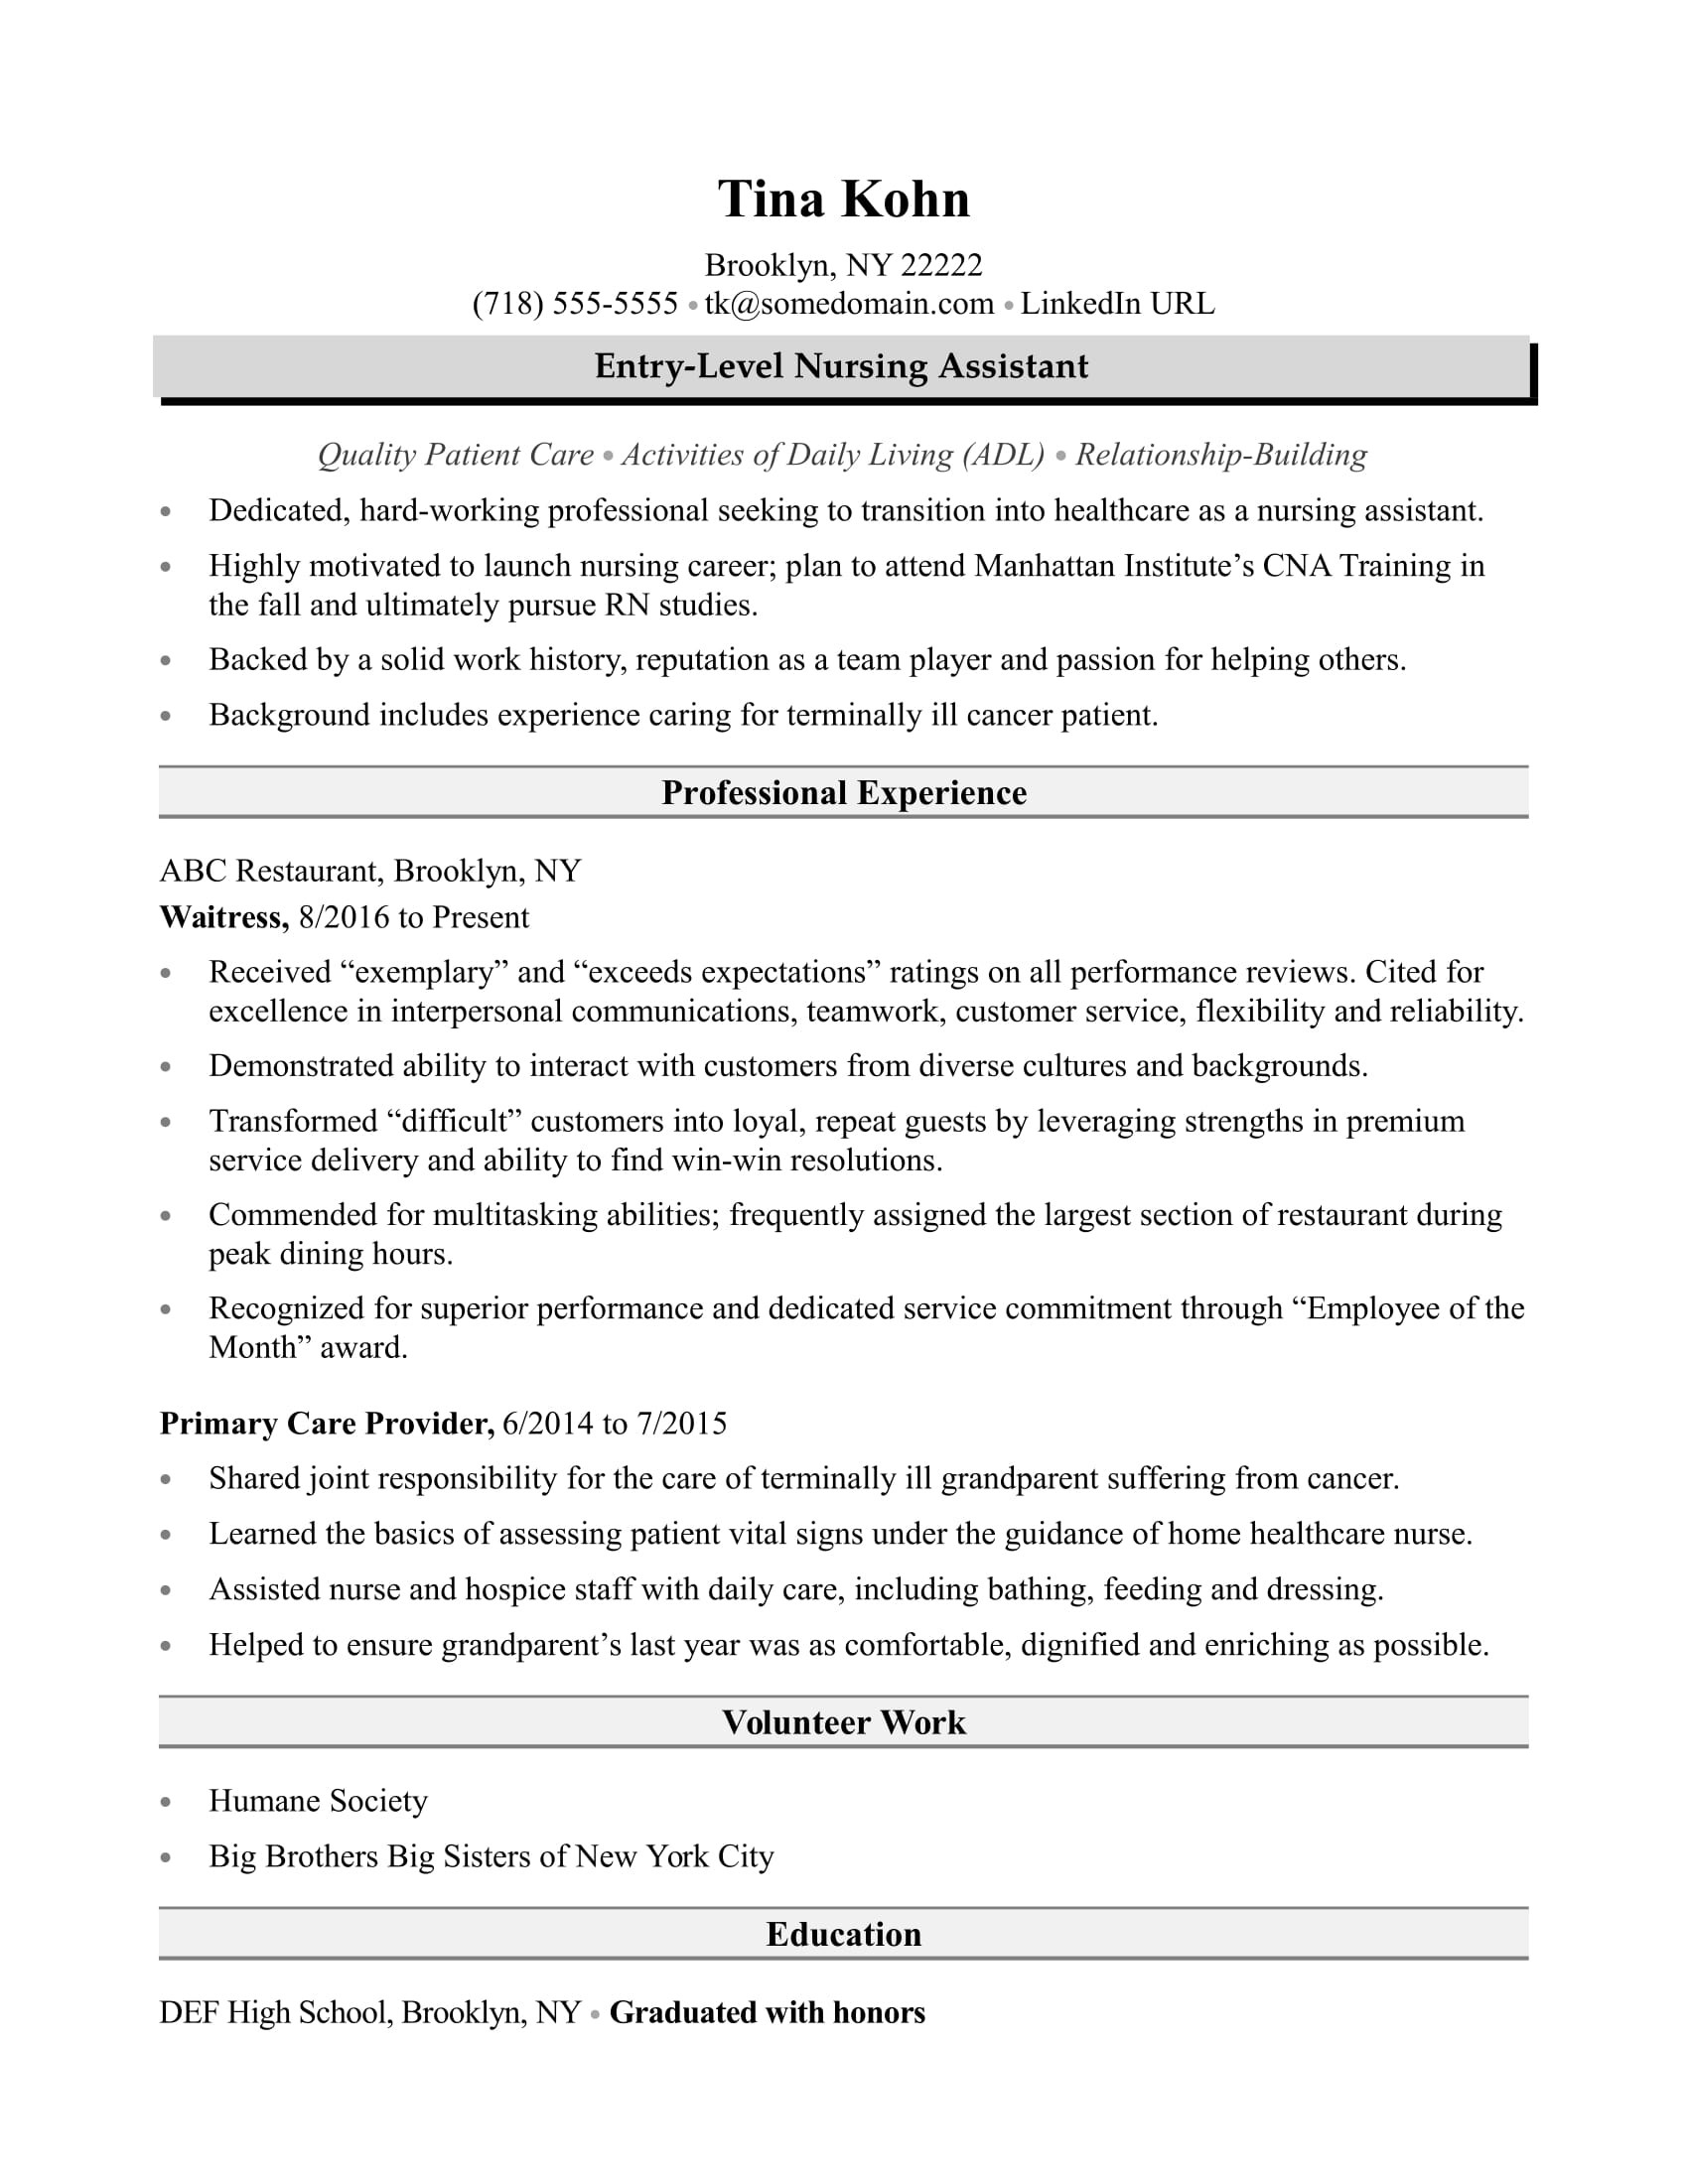 Resume Sample for Cna with No Experience Nursing assistant Resume Sample Monster.com